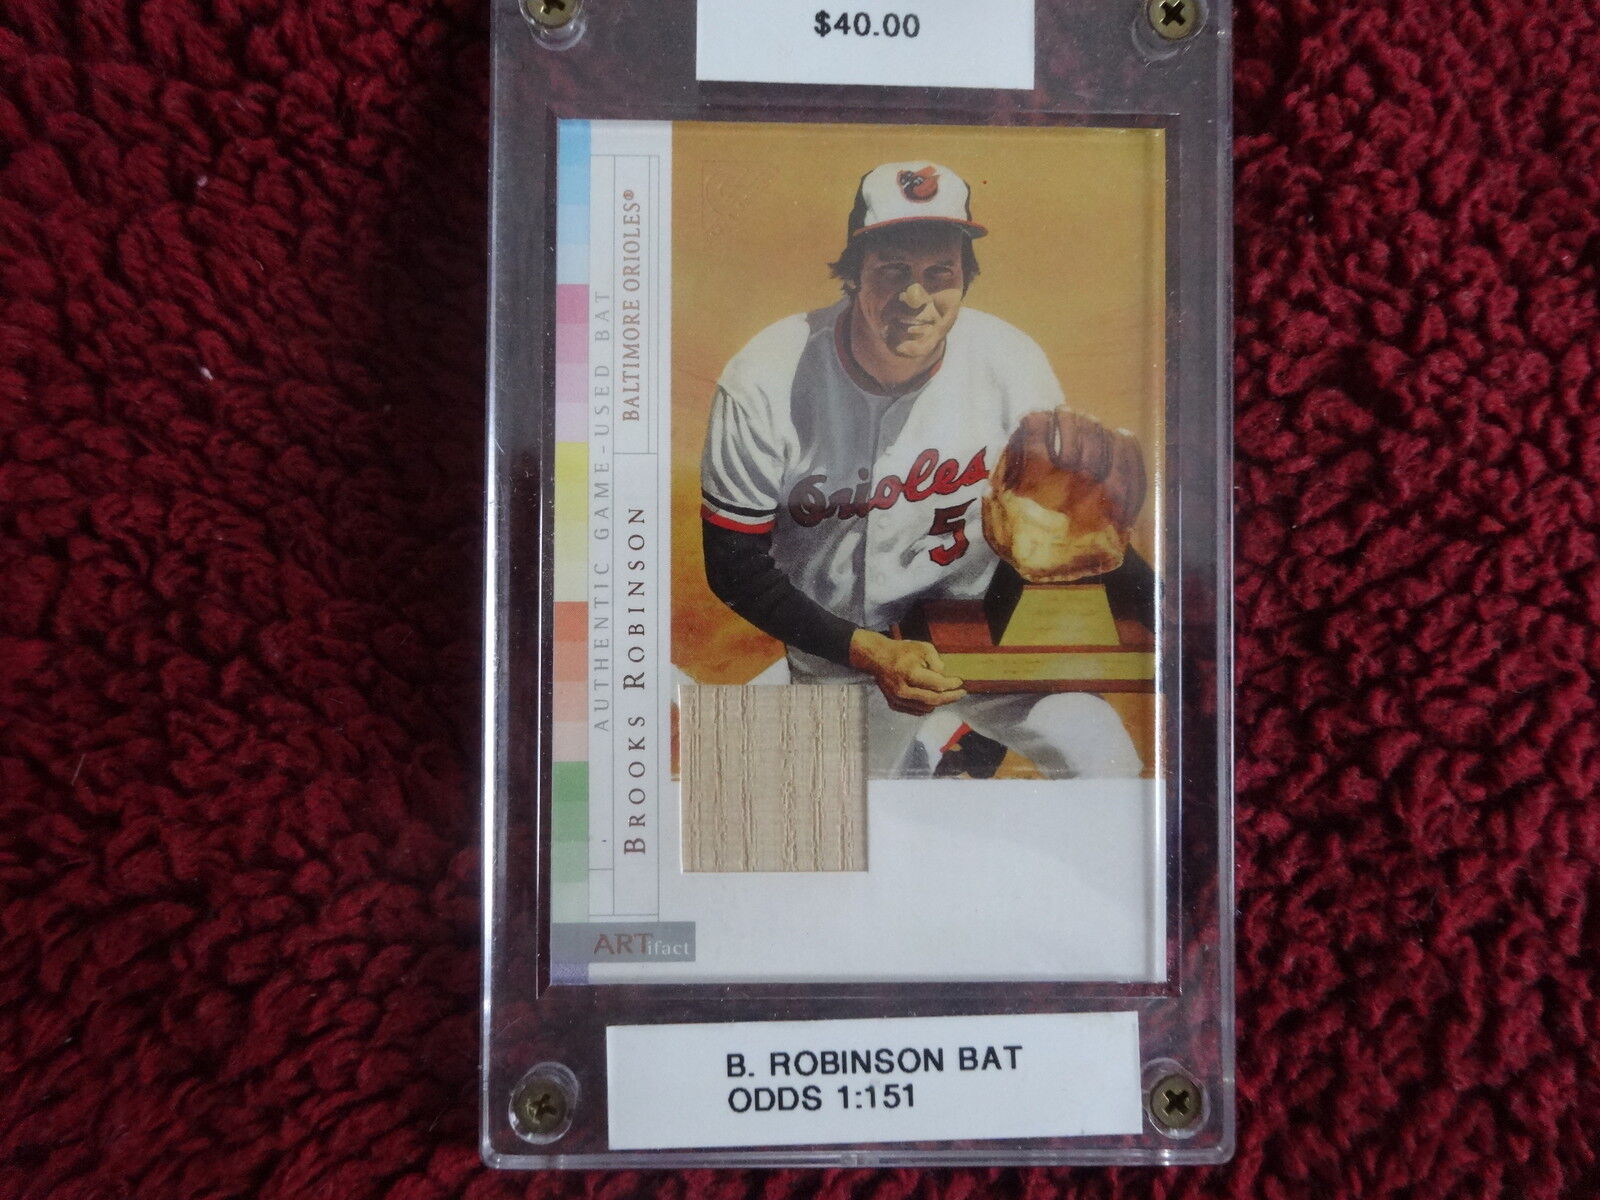 2003 BROOKS ROBINSON AUTHENTIC GAME USED BAT CARD TOPPS BALTIMORE ORIOLES